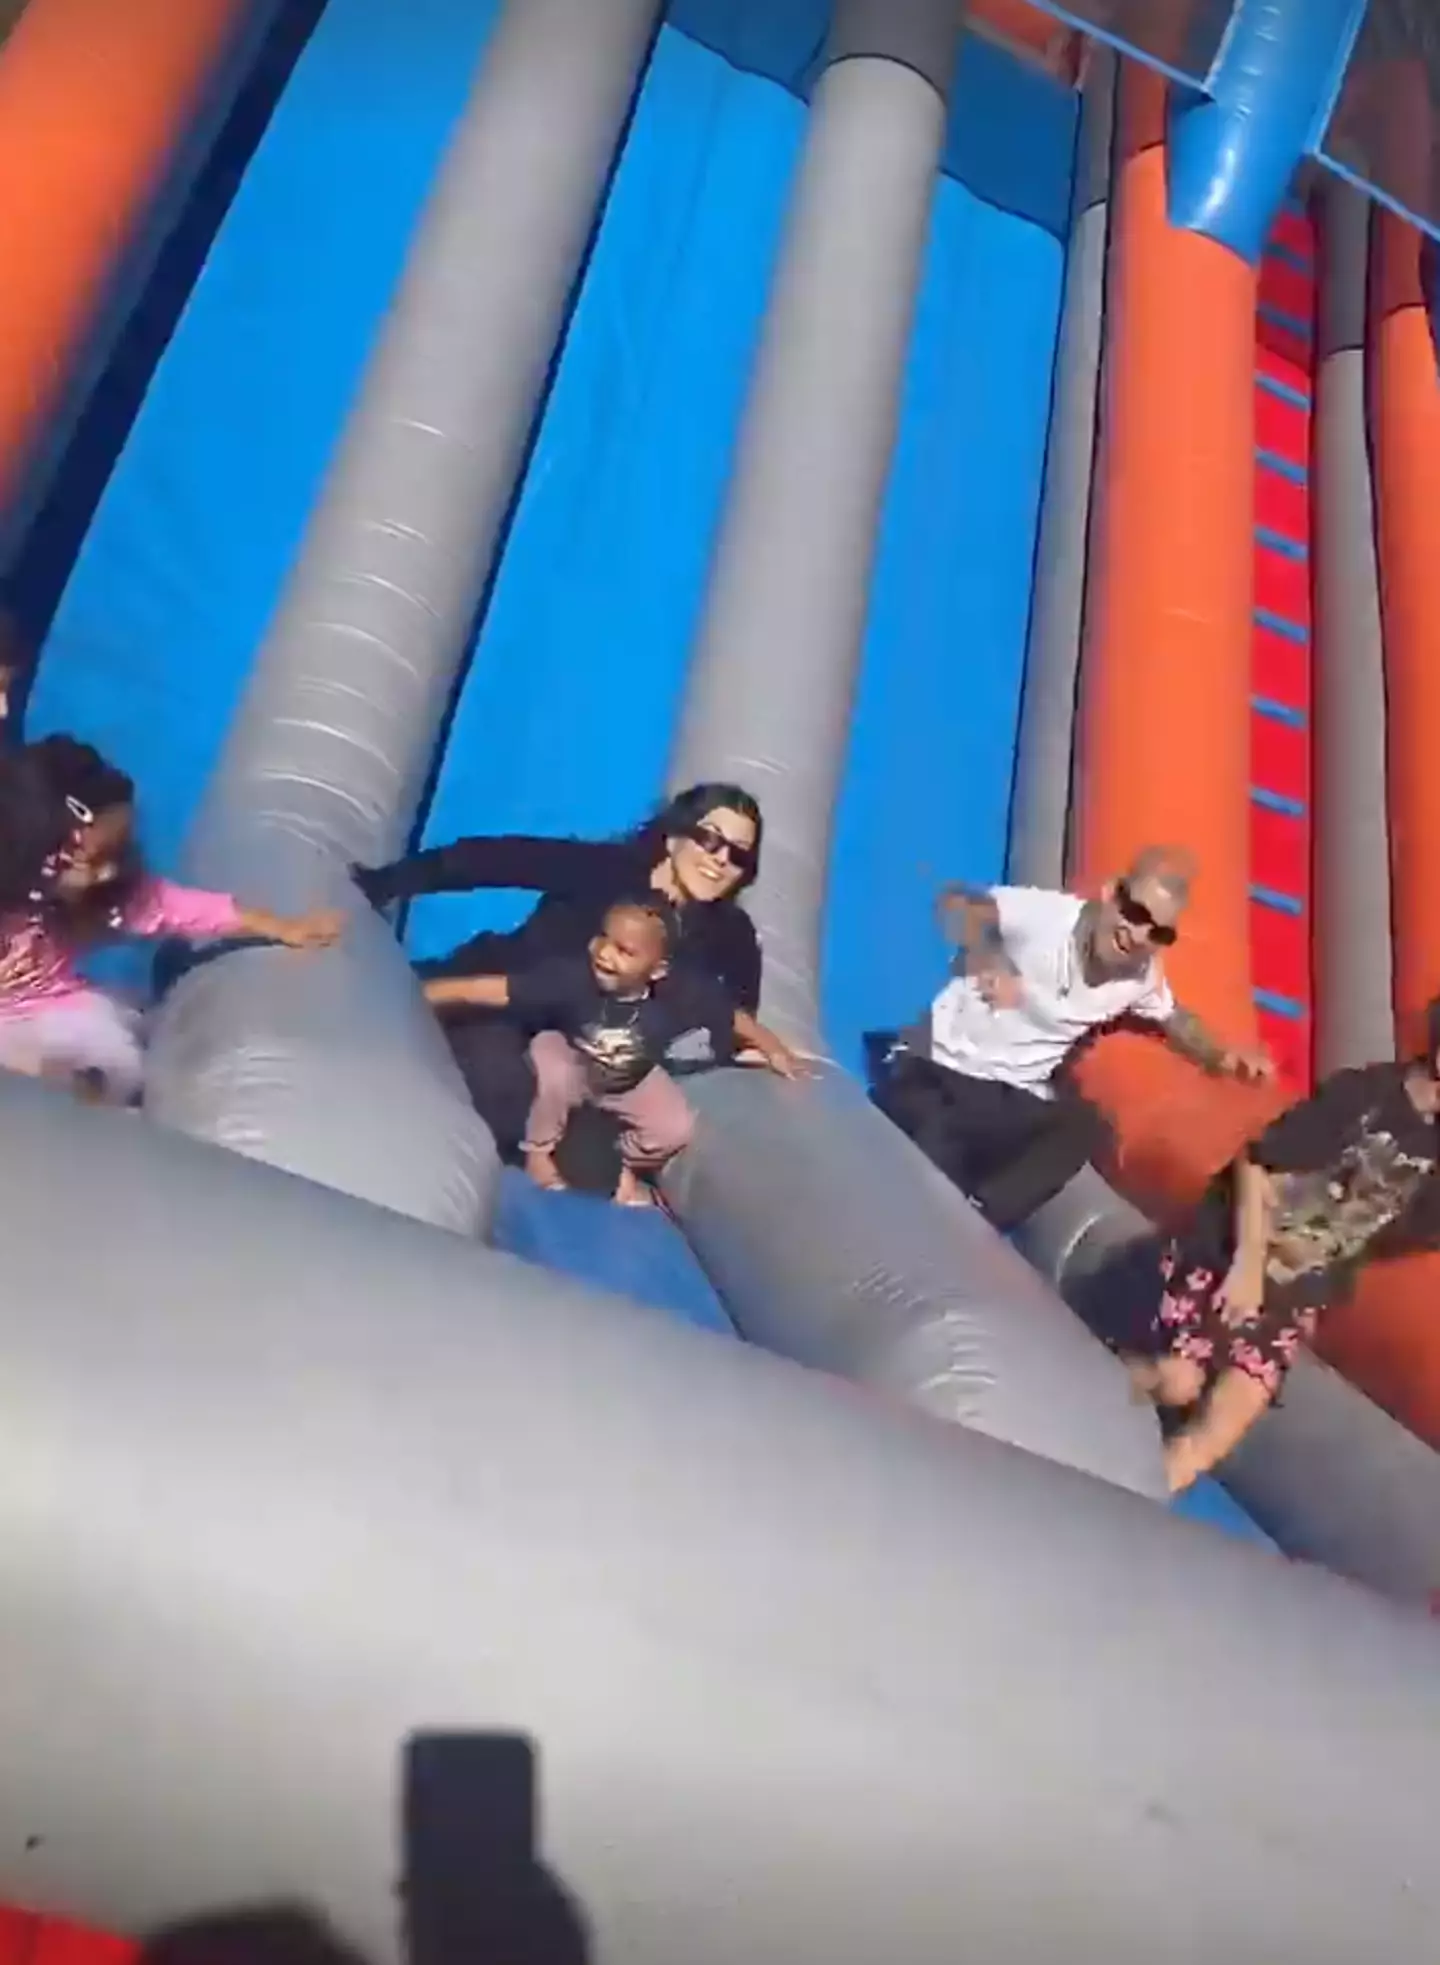 The party had inflatable slides (